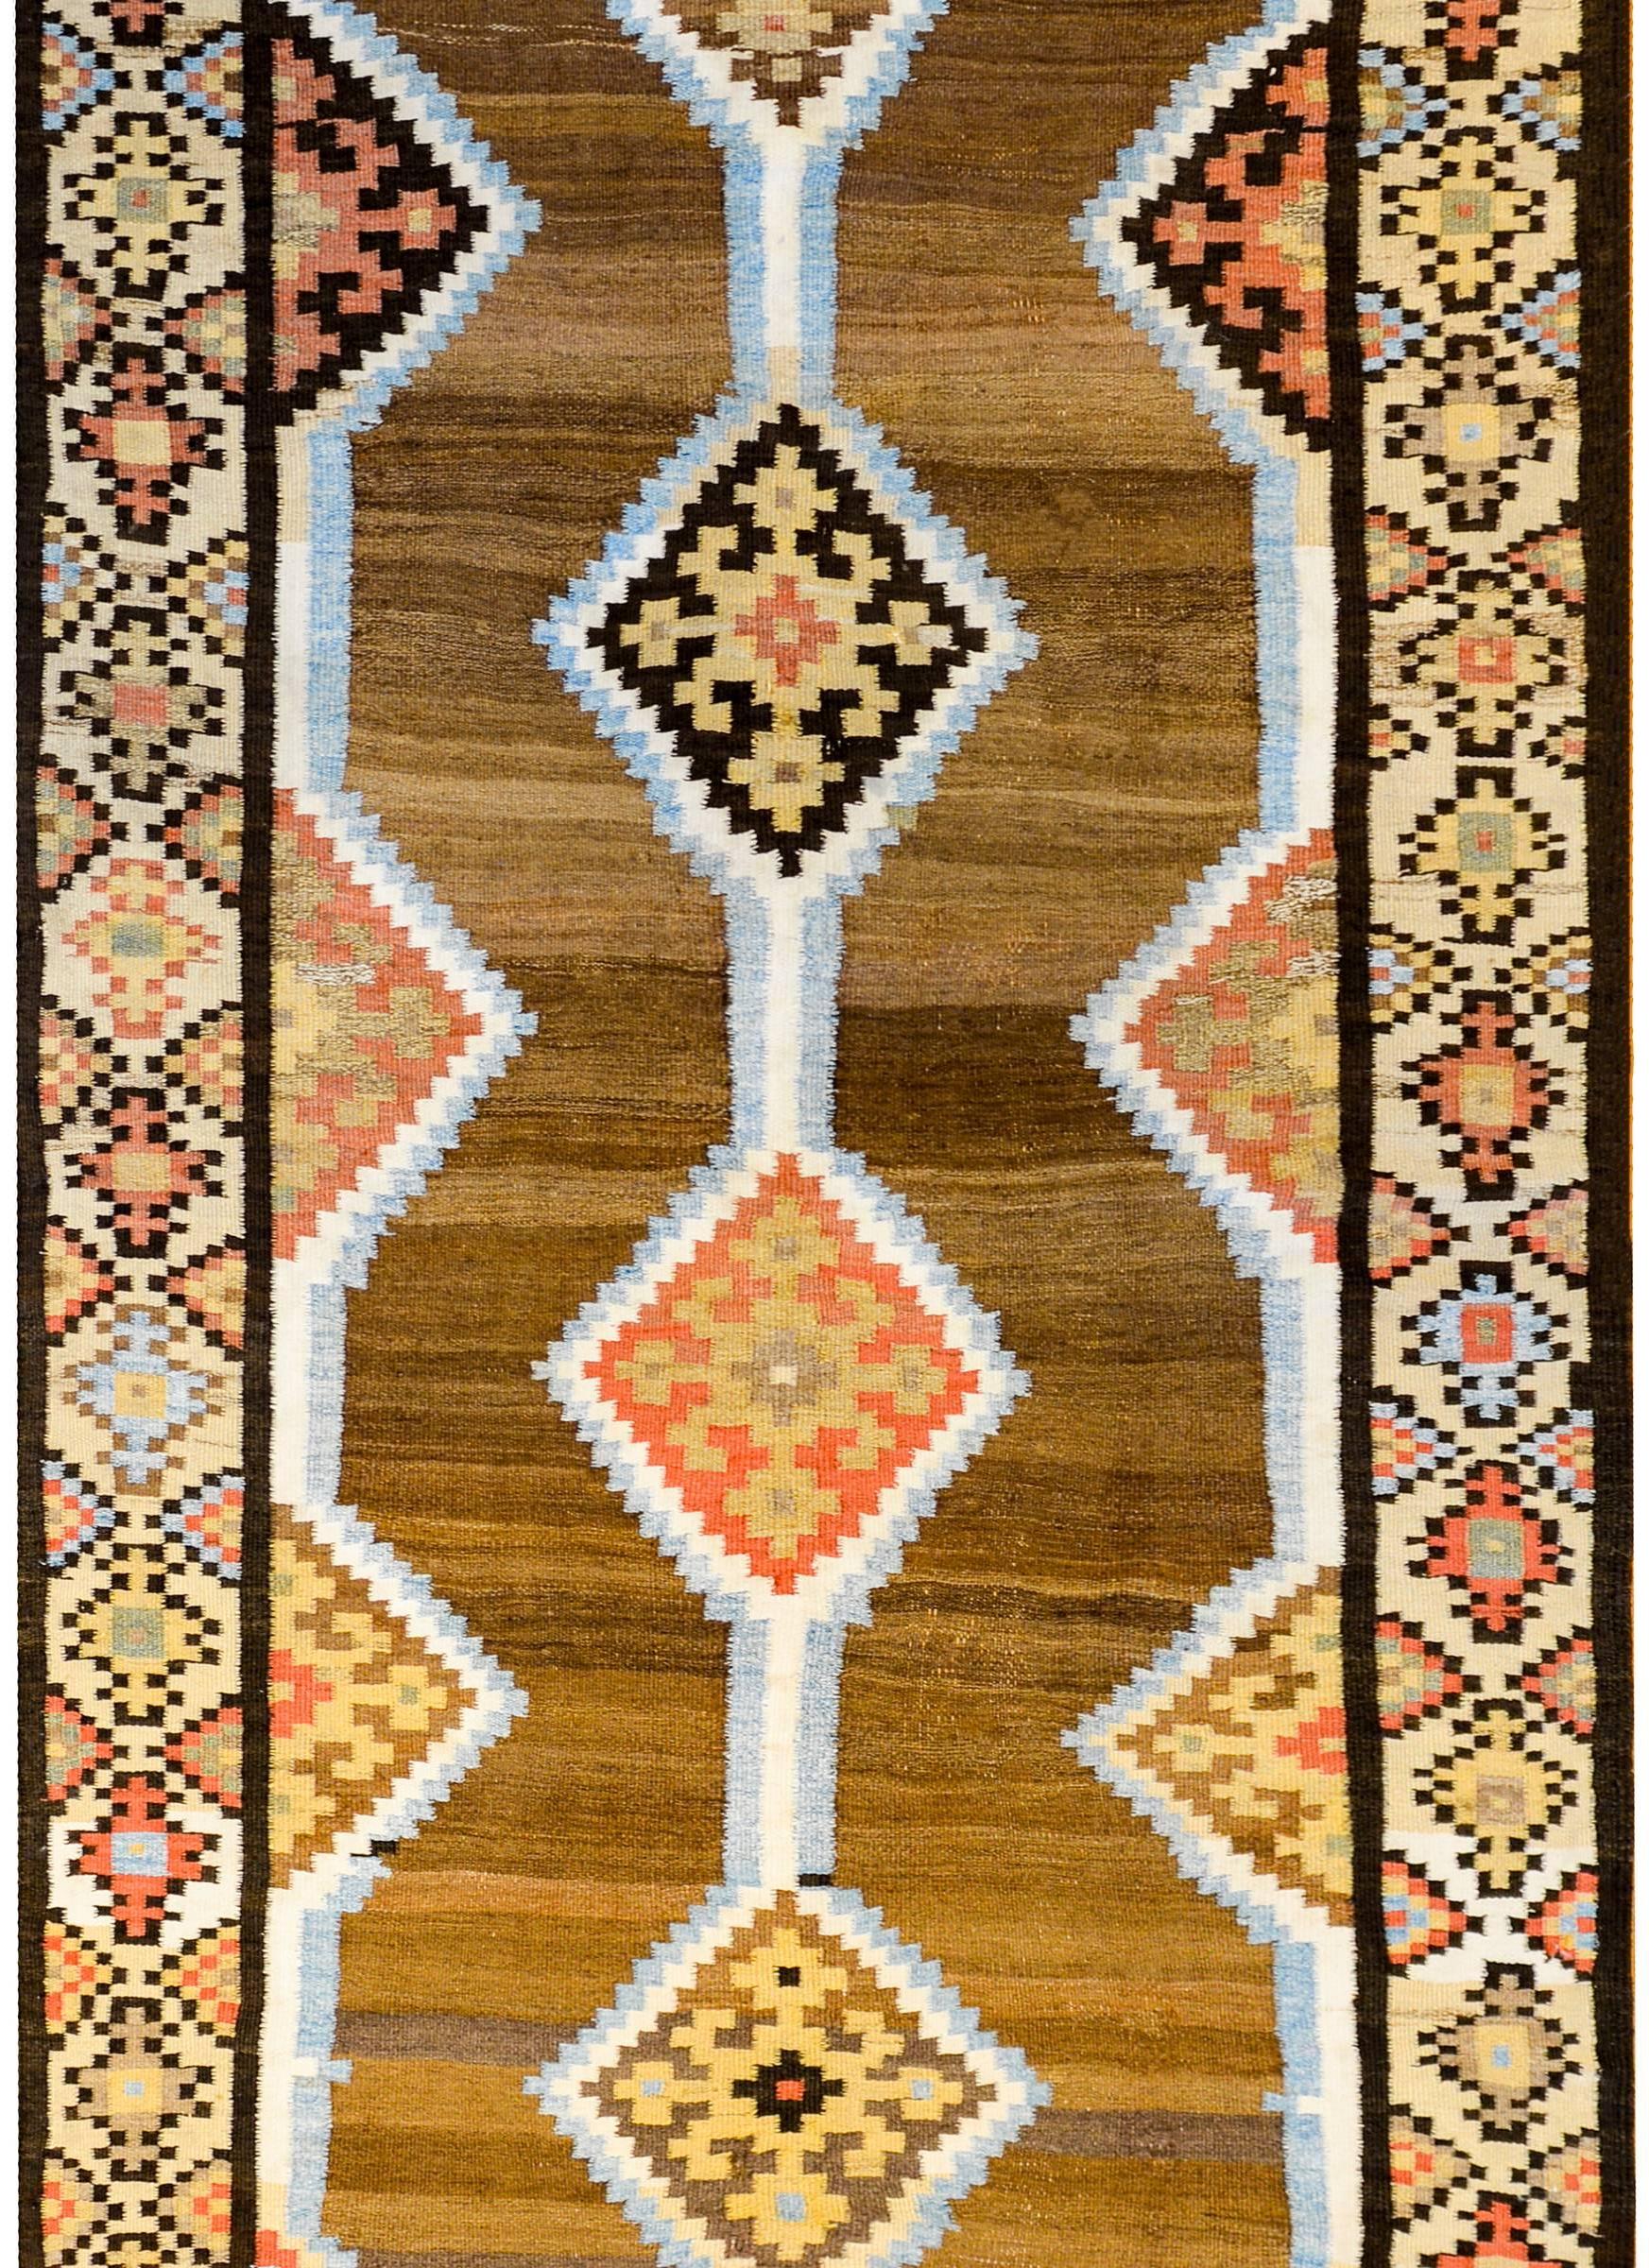 An early 20th century antique Persian Shahseven runner with four geometric diamond medallions on a variegated natural brown, un-dyed, background, surrounded by wonderful complementary multicolored floral and geometric borders.